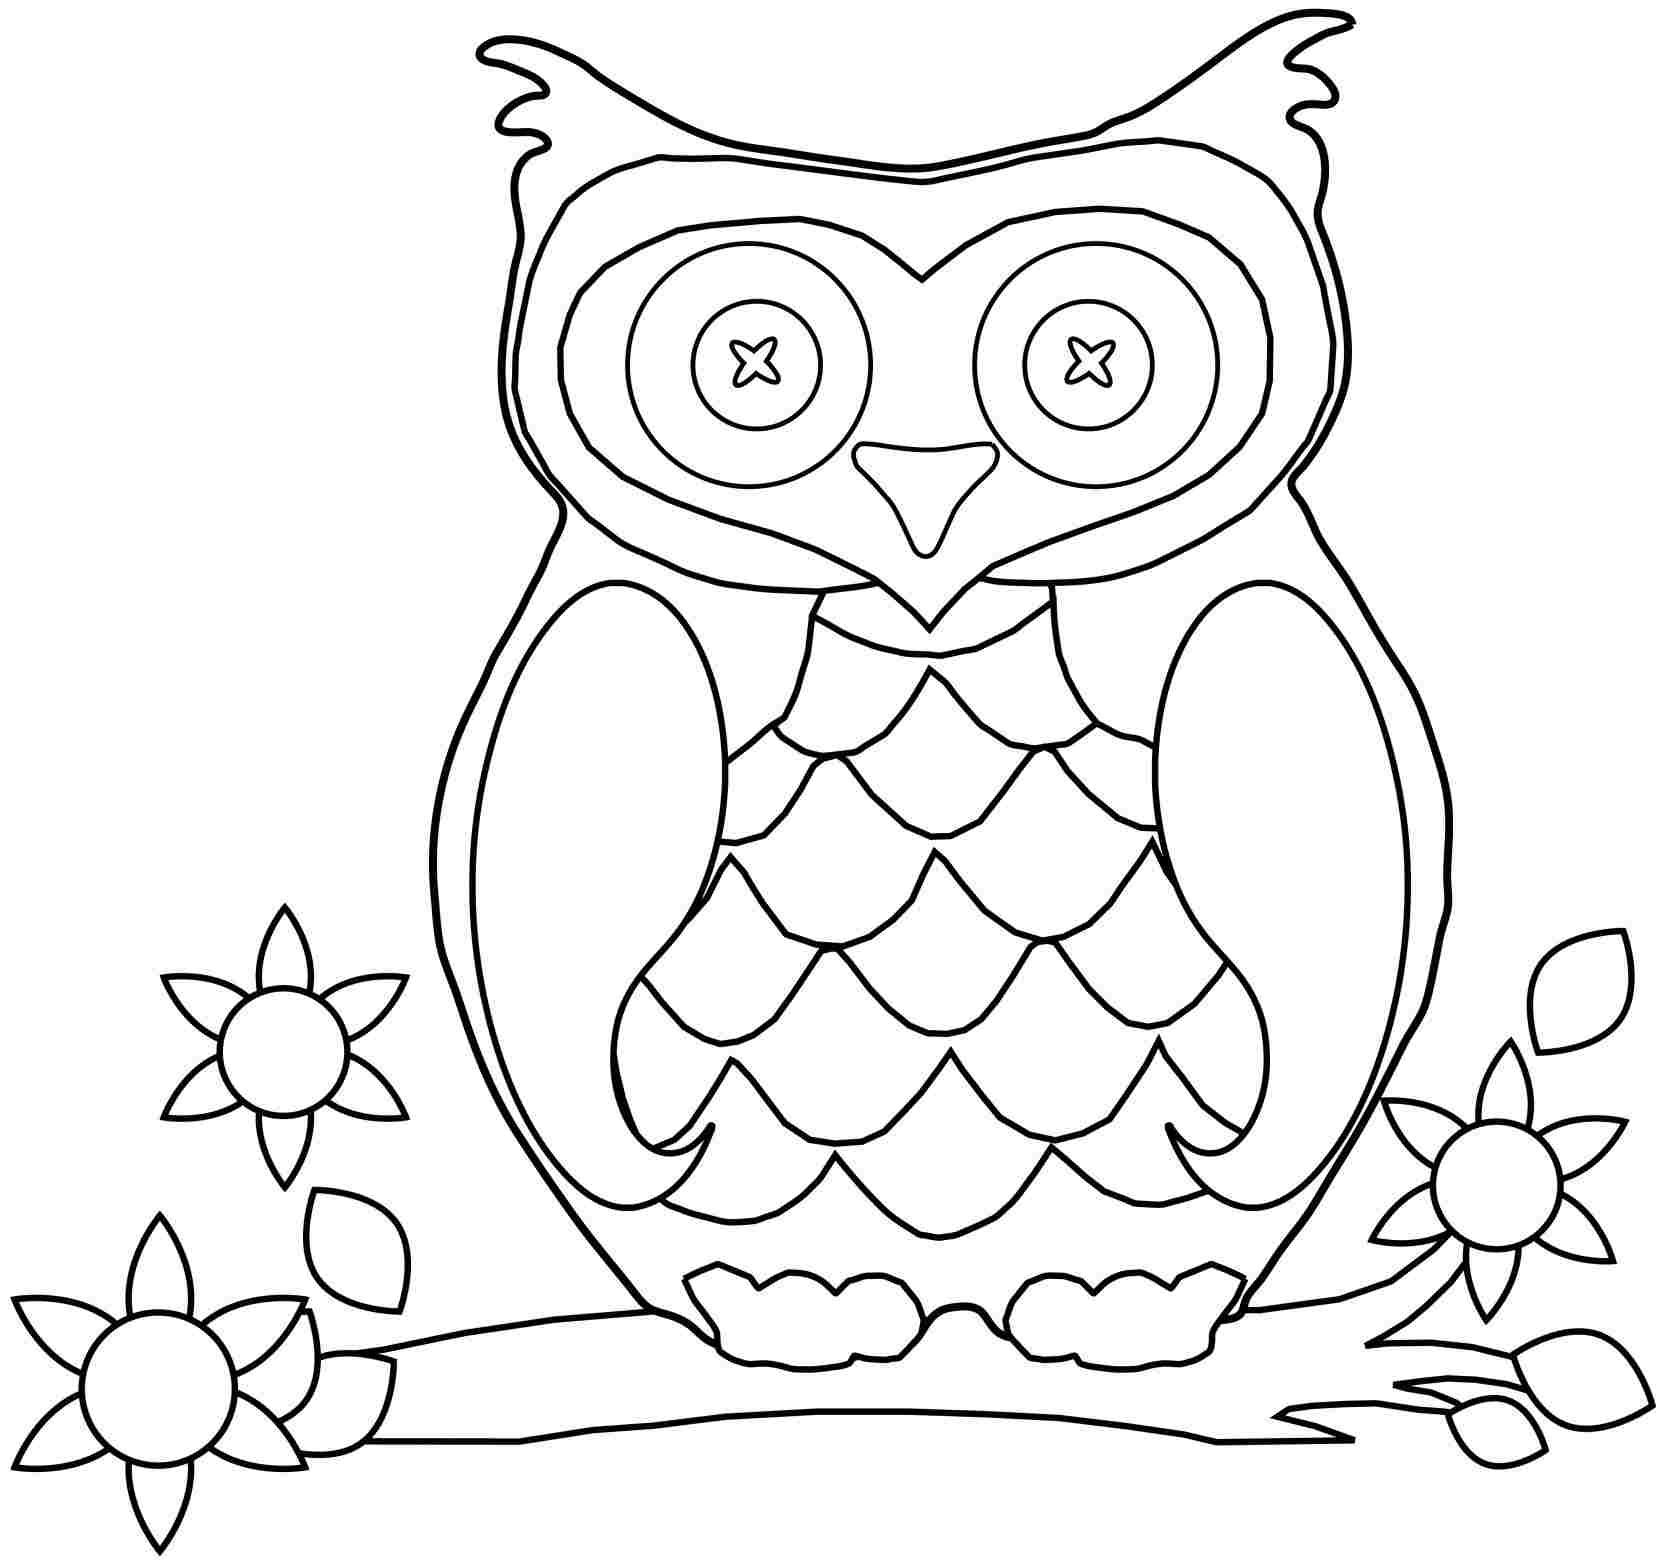 Cartoon Girl Owl Coloring Pages - Coloring Pages For All Ages